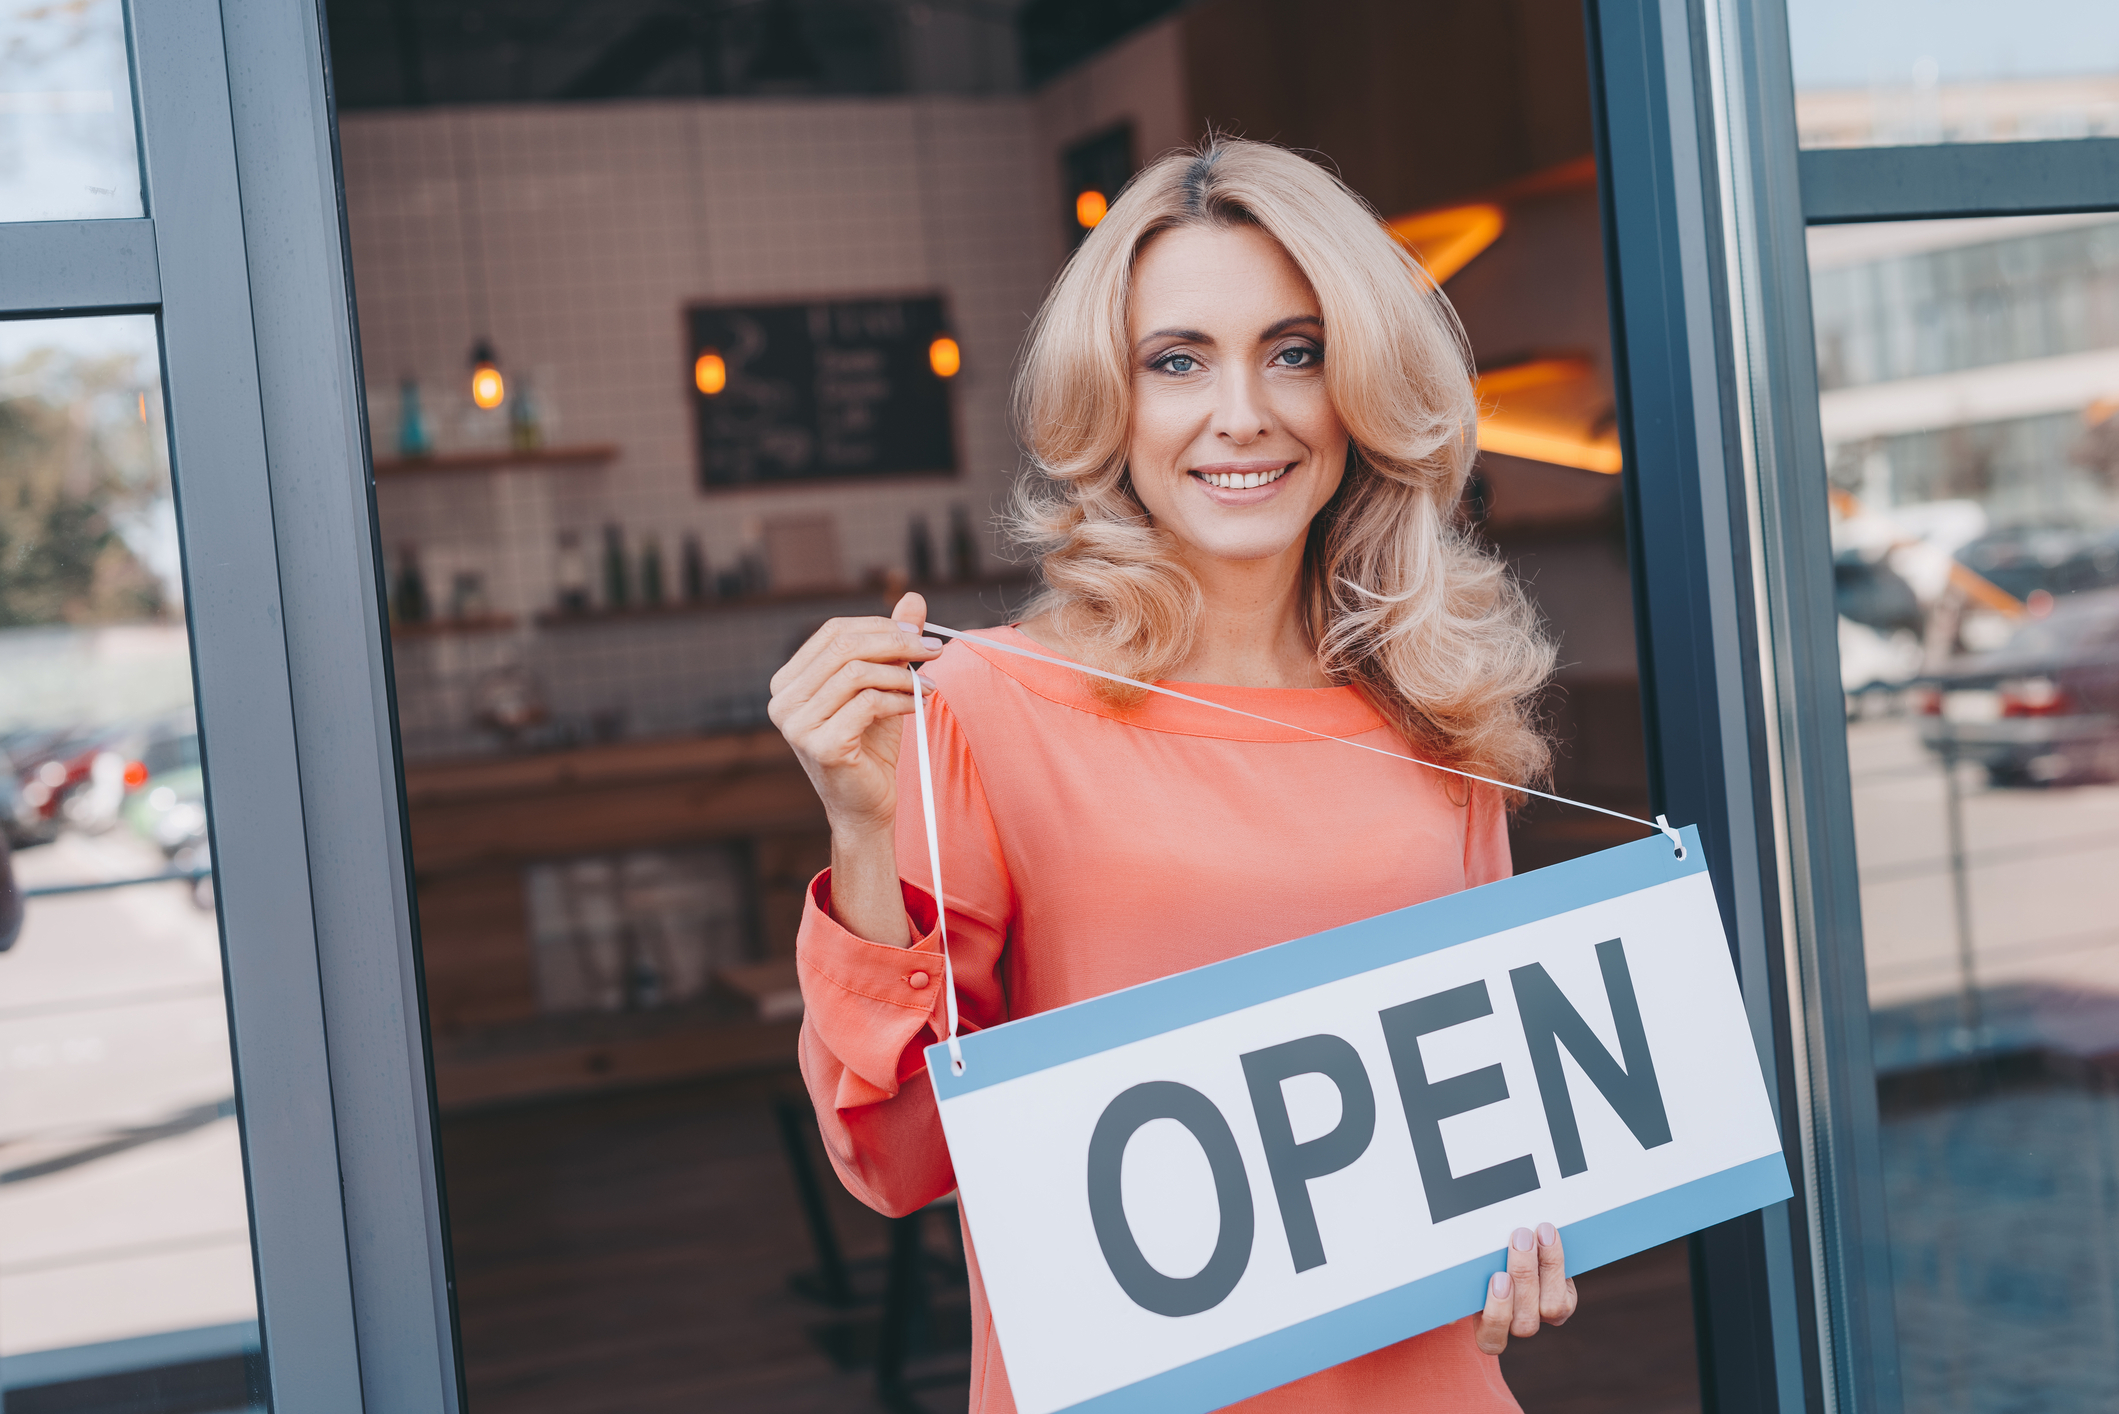 Business Security: Is Your Business Opening Late or Closing Early?